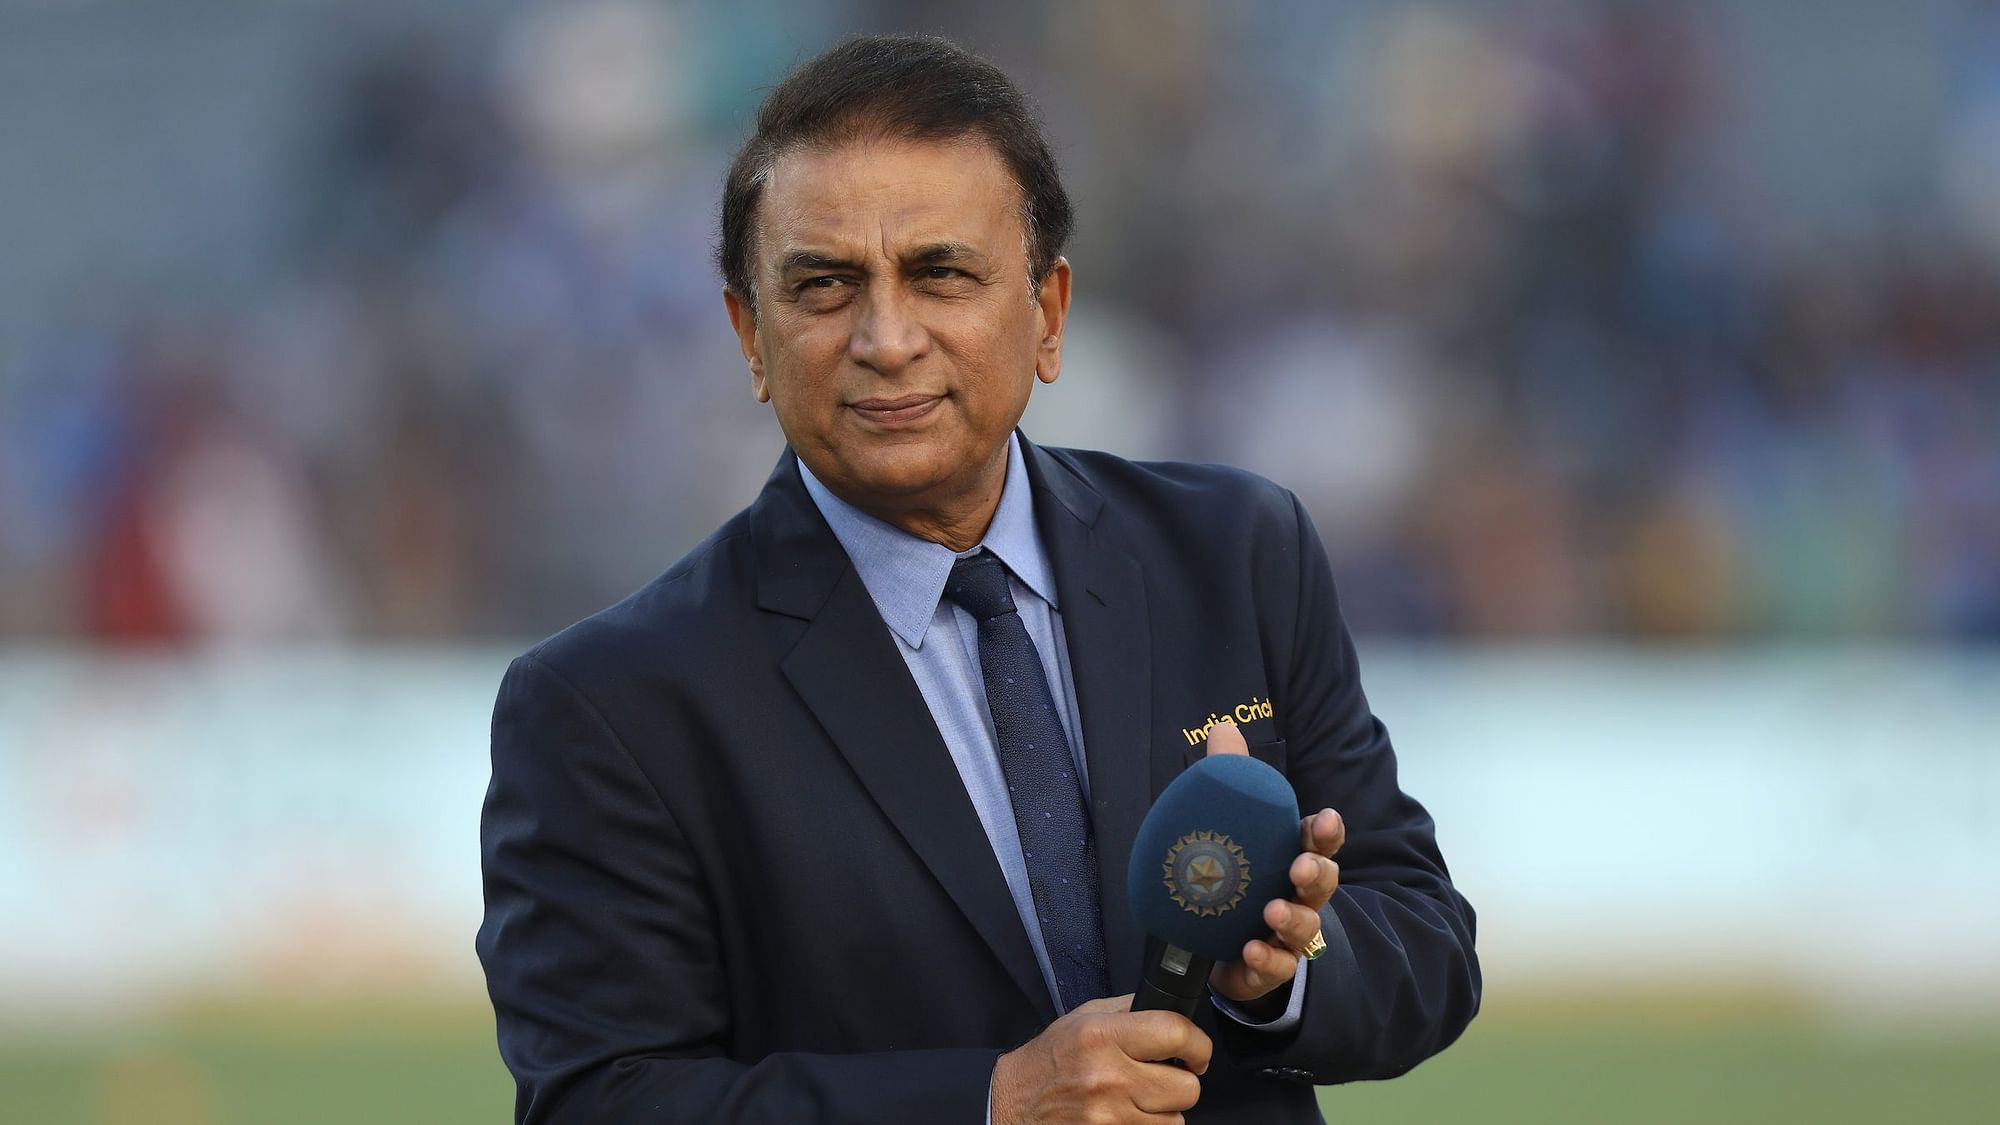 Former Indian cricketer Sunil Gavaskar is hoping that this IPL will bring positive energy into the lives of millions of people.